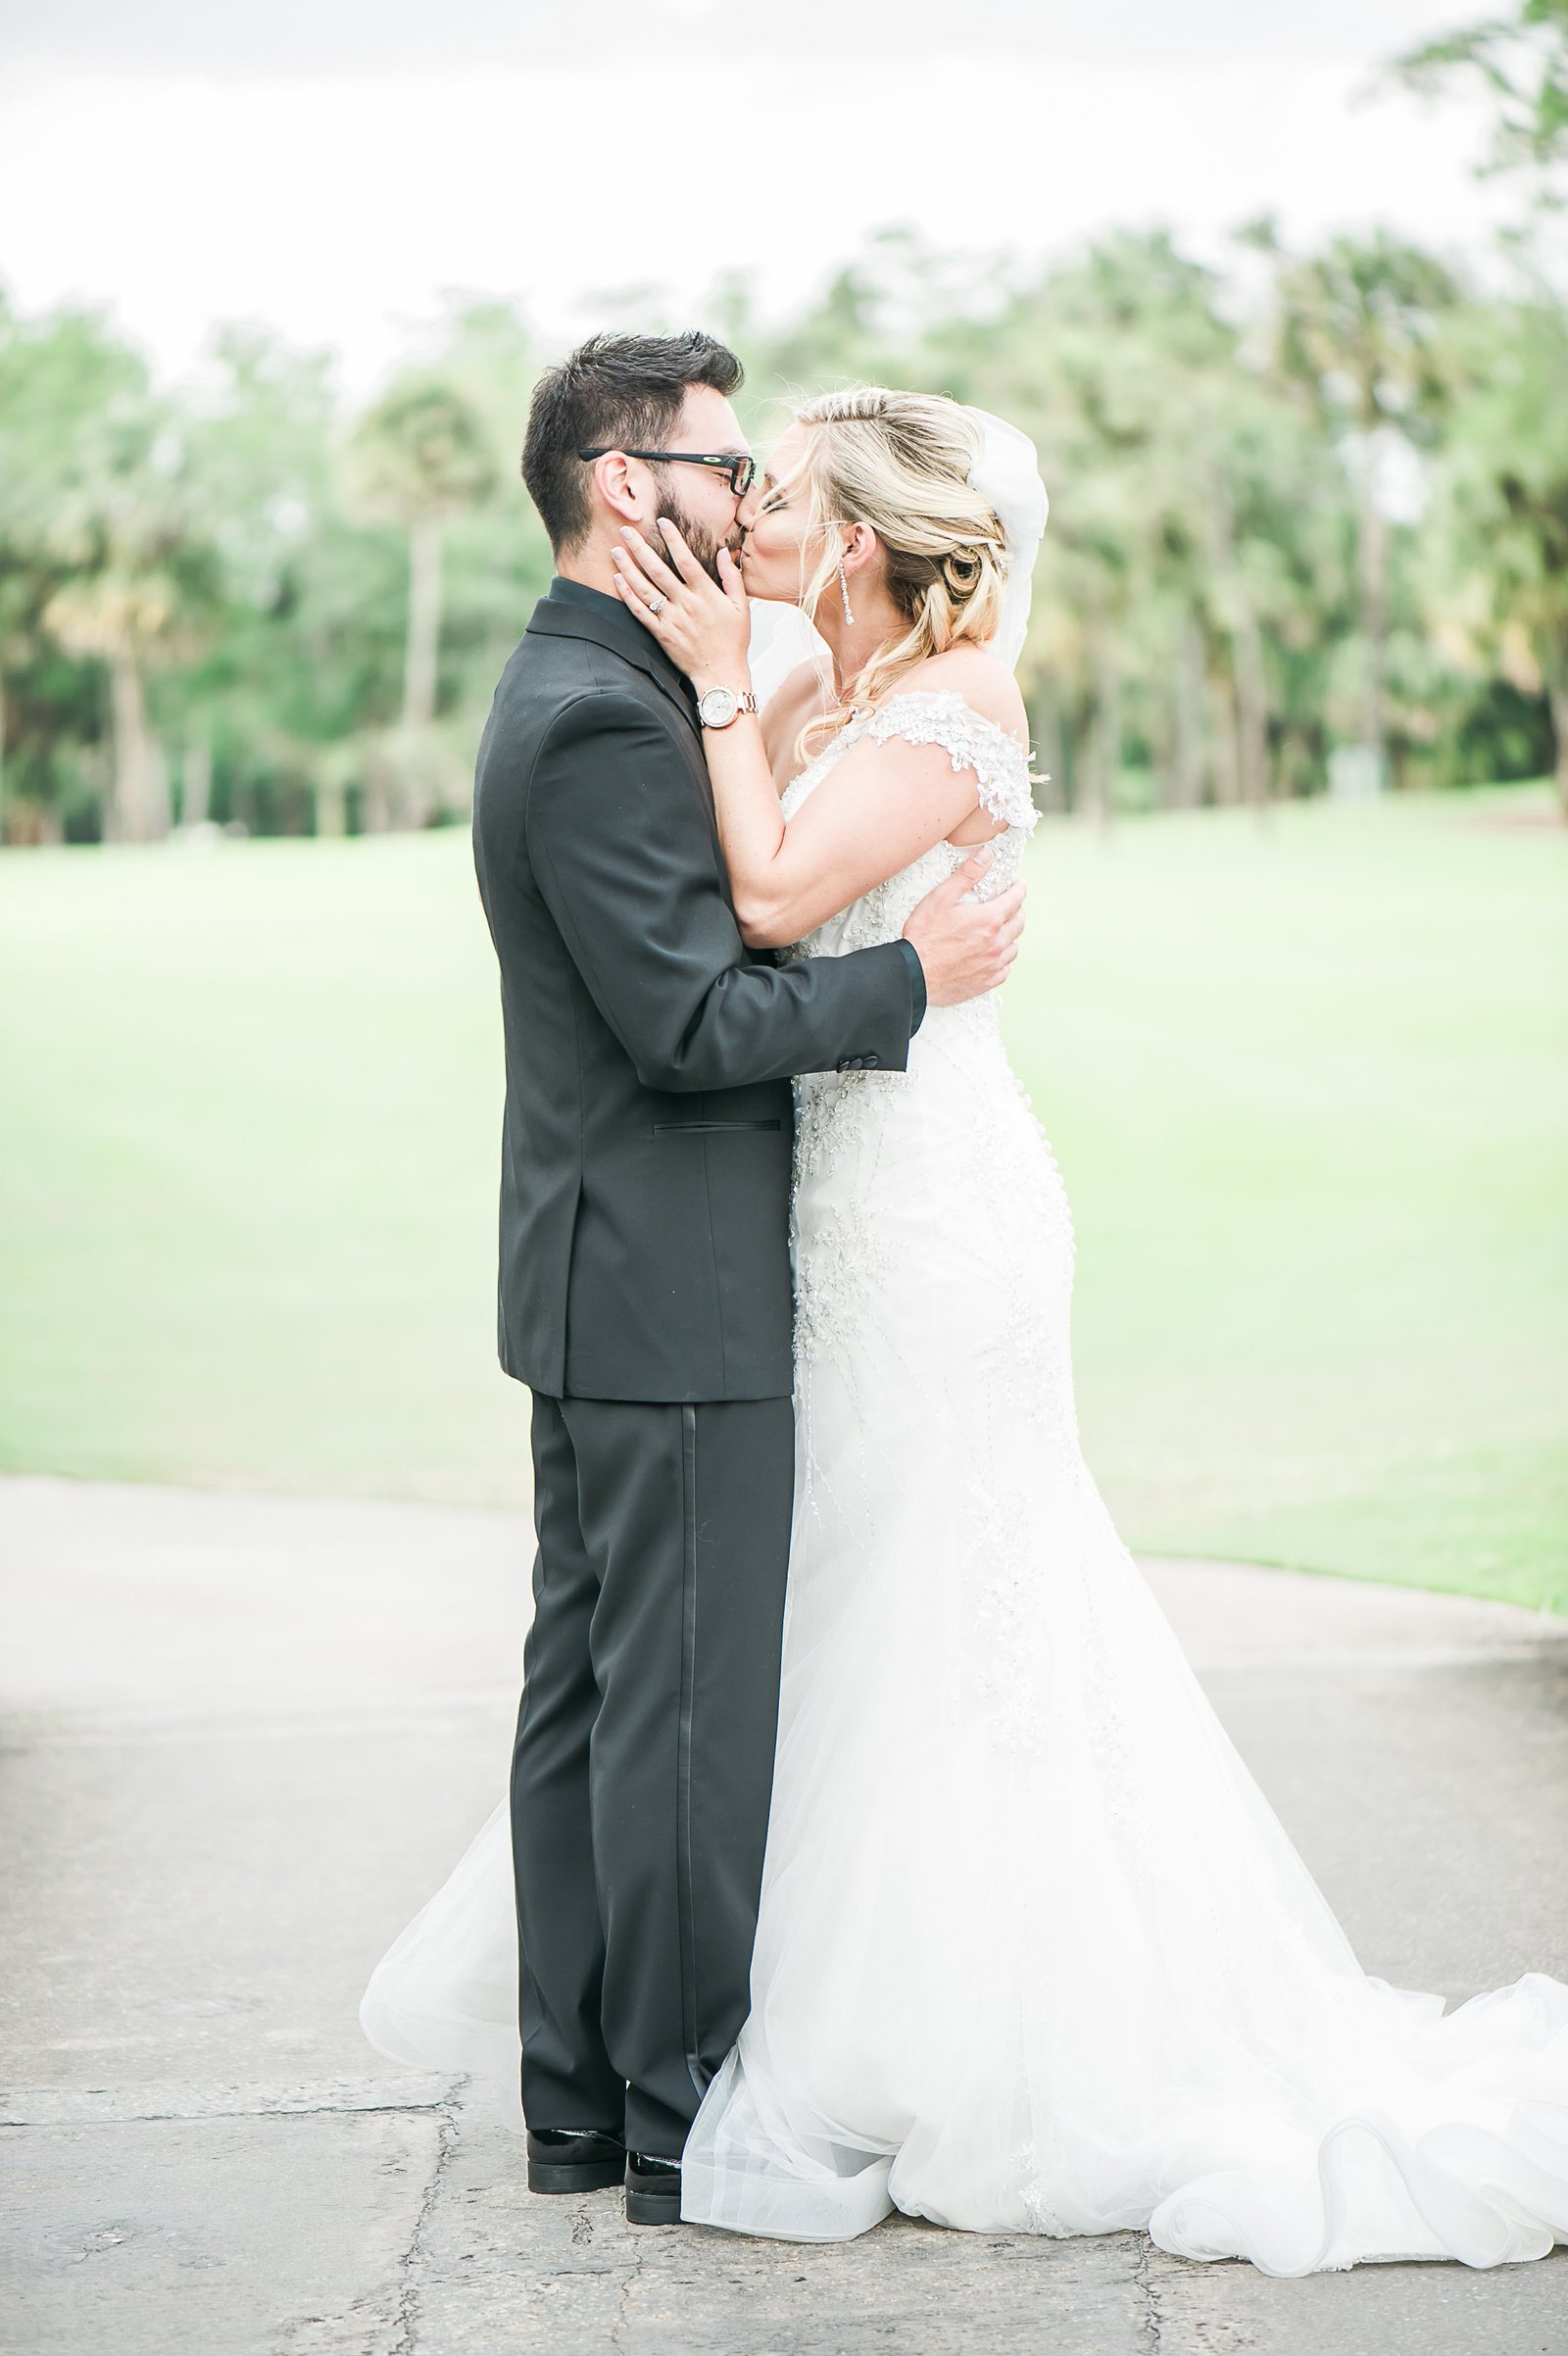 Just Married - Myacoo Country Club Wedding - Palm Beach Wedding Photography by Palm Beach Photography, Inc.